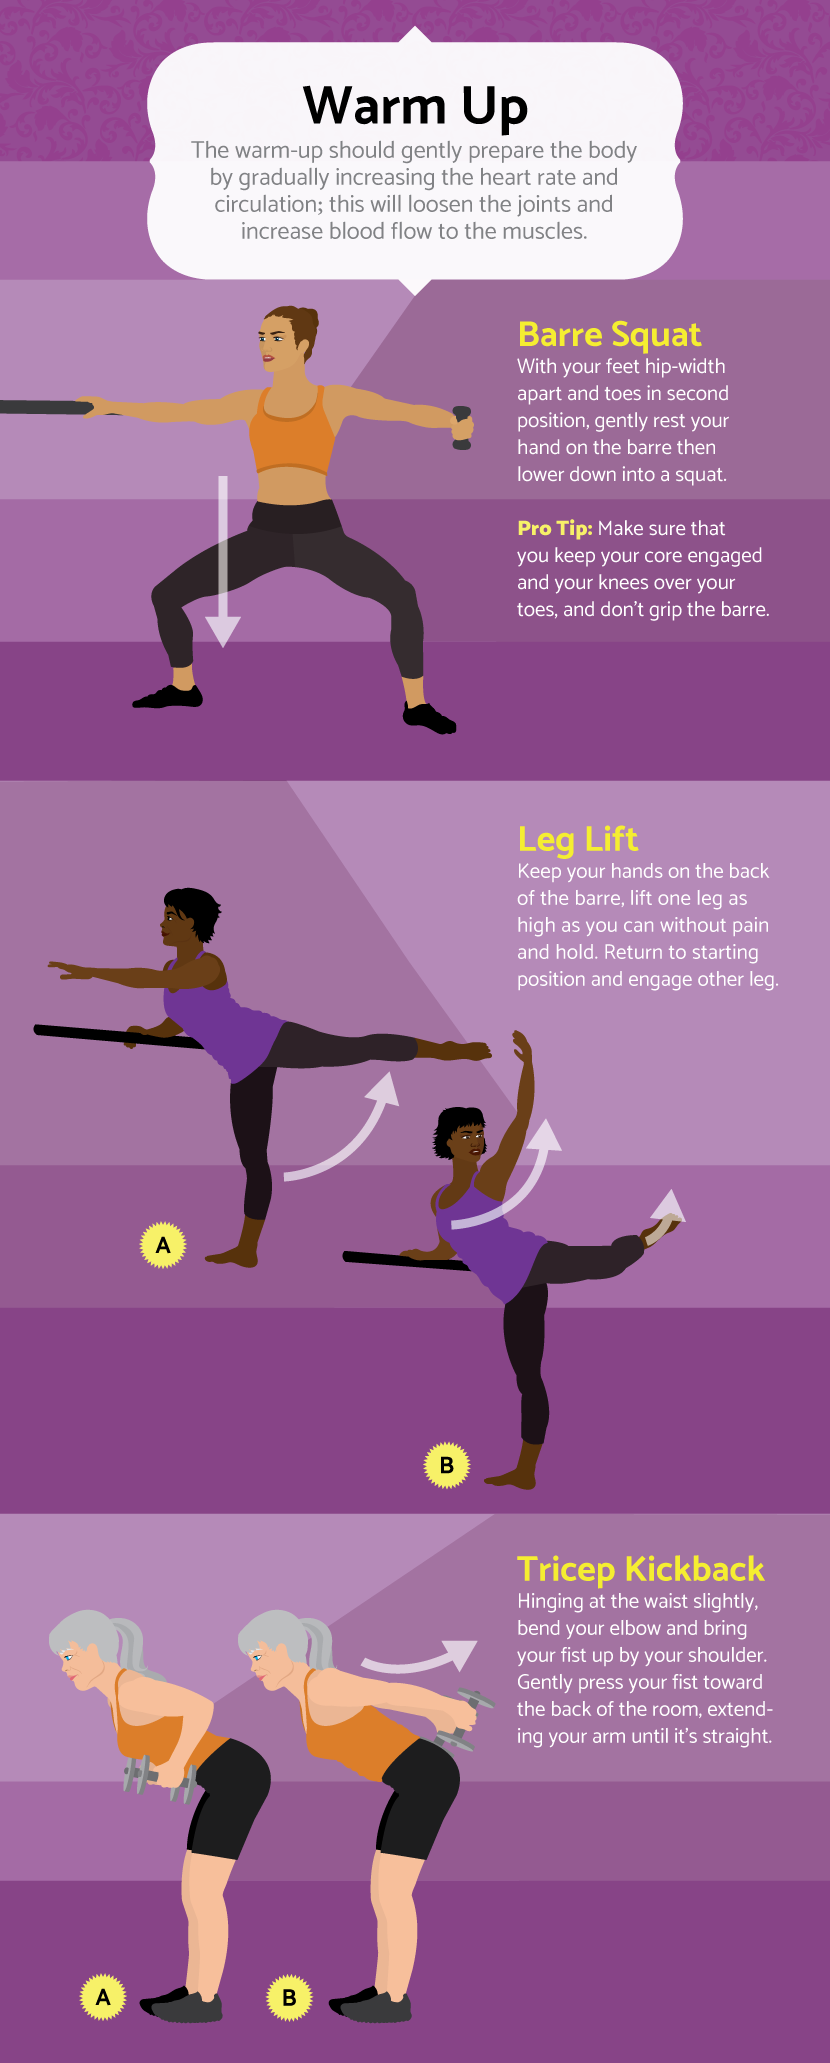 Barre Class Warmup - A Barre and Ballet-Inspired Workout